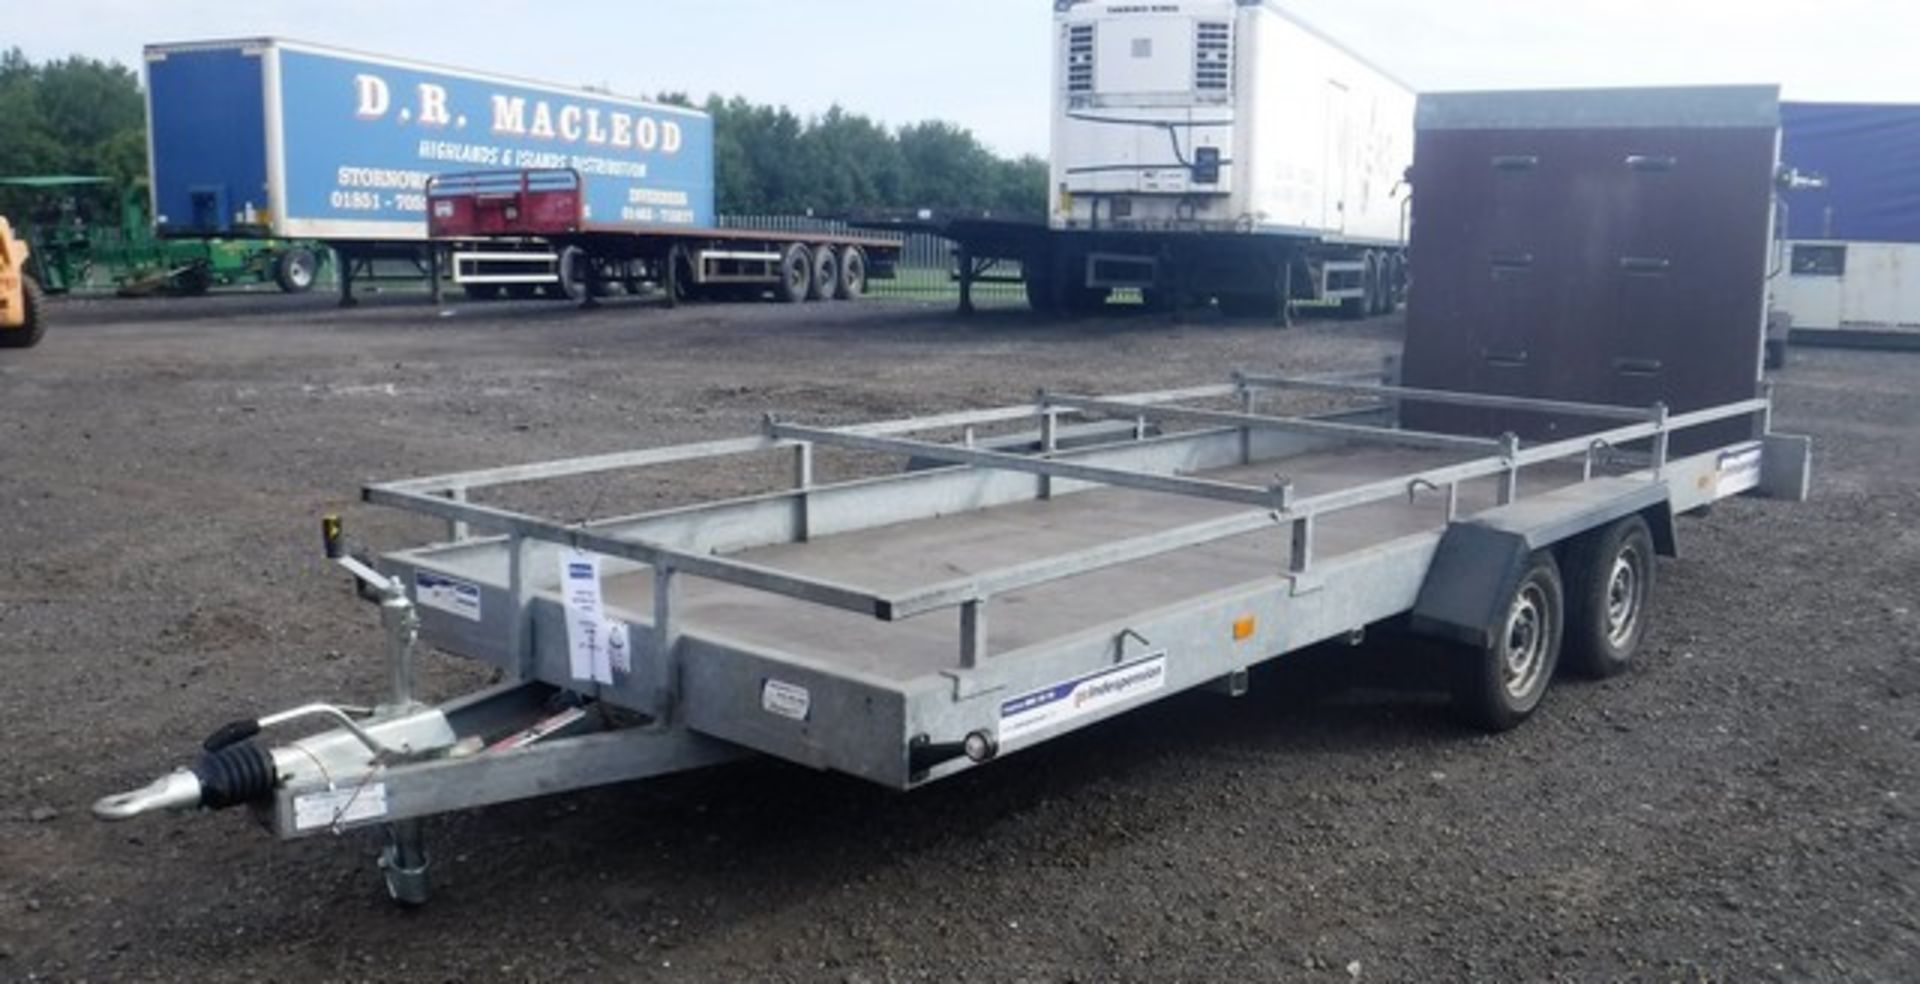 2003 INDESPENSION 18' X 6' twin axle trailer c/w 5' ramp. Max gross weight 2000kgs. VIN 076764. Asse